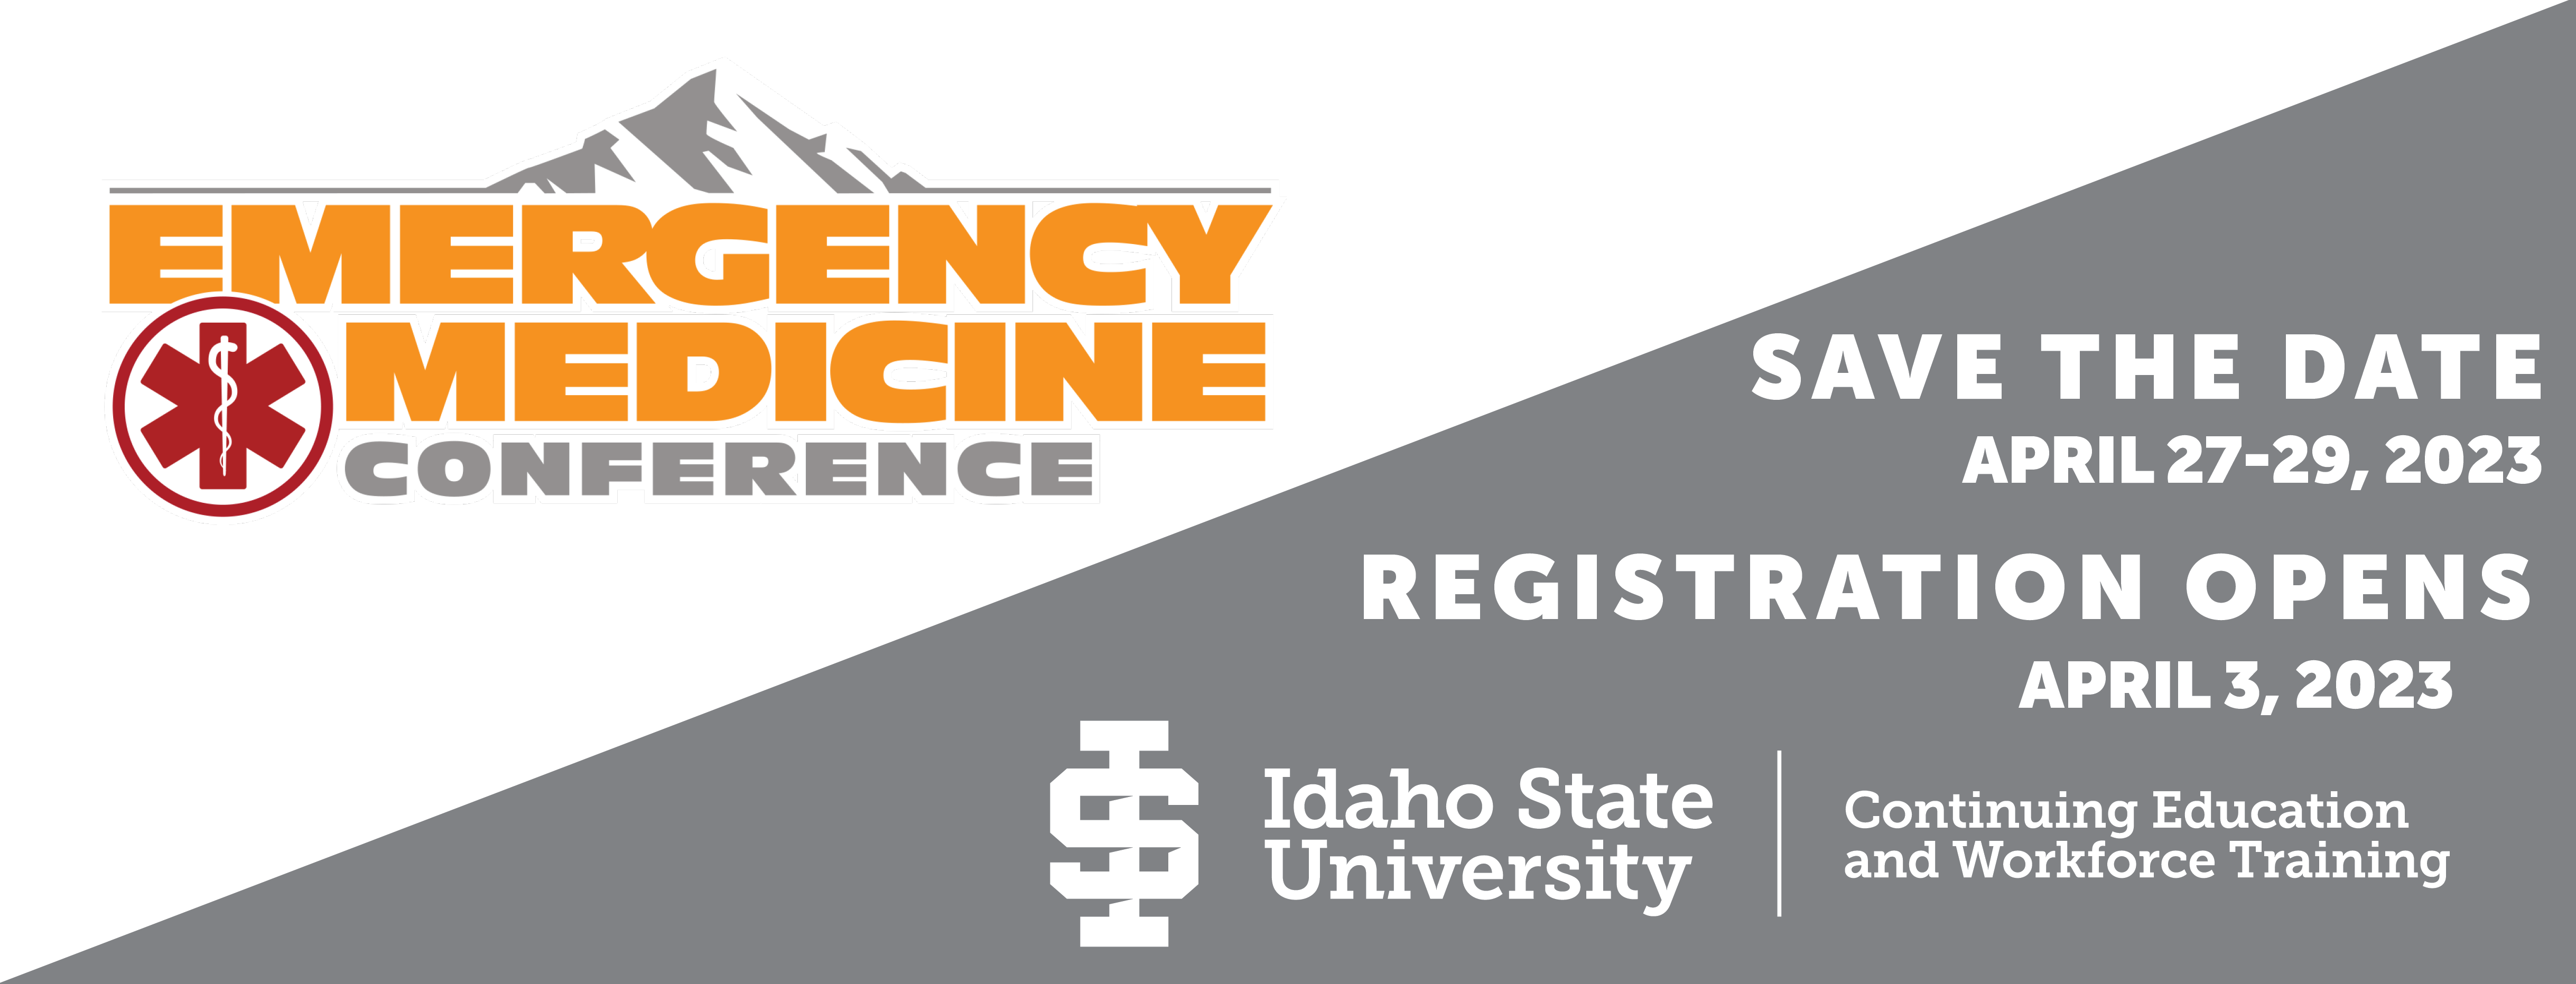 CEWT 2023 Emergency Medicine Conference - Save the Date!